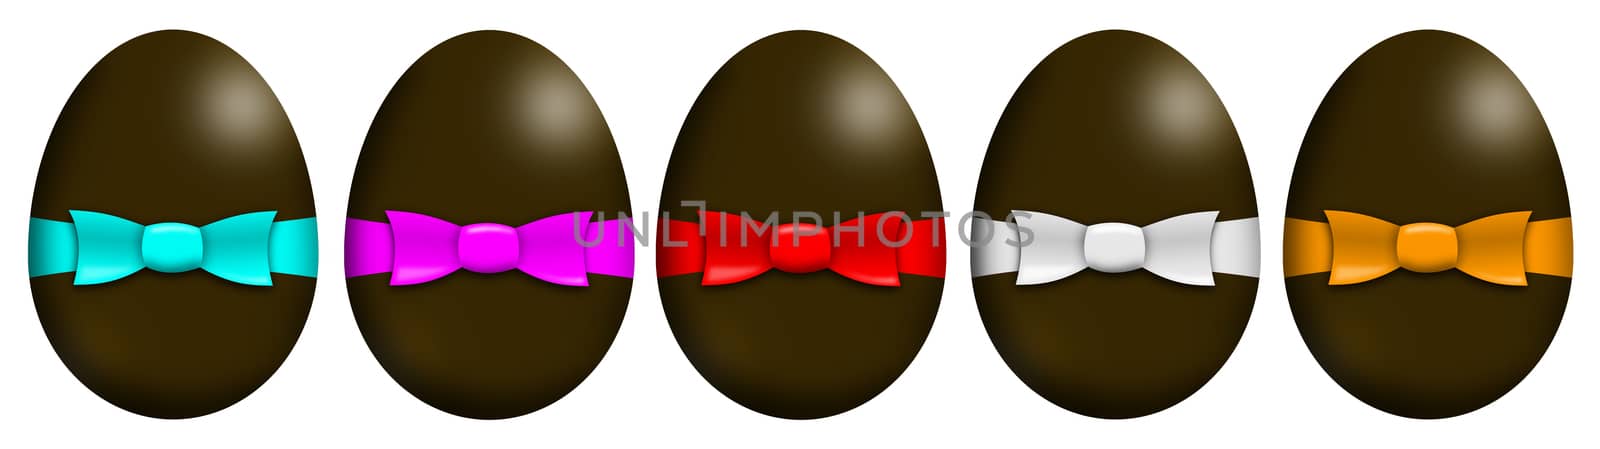 Five easter eggs with blue pink red silver gold ribbons illustration on white with clipping path